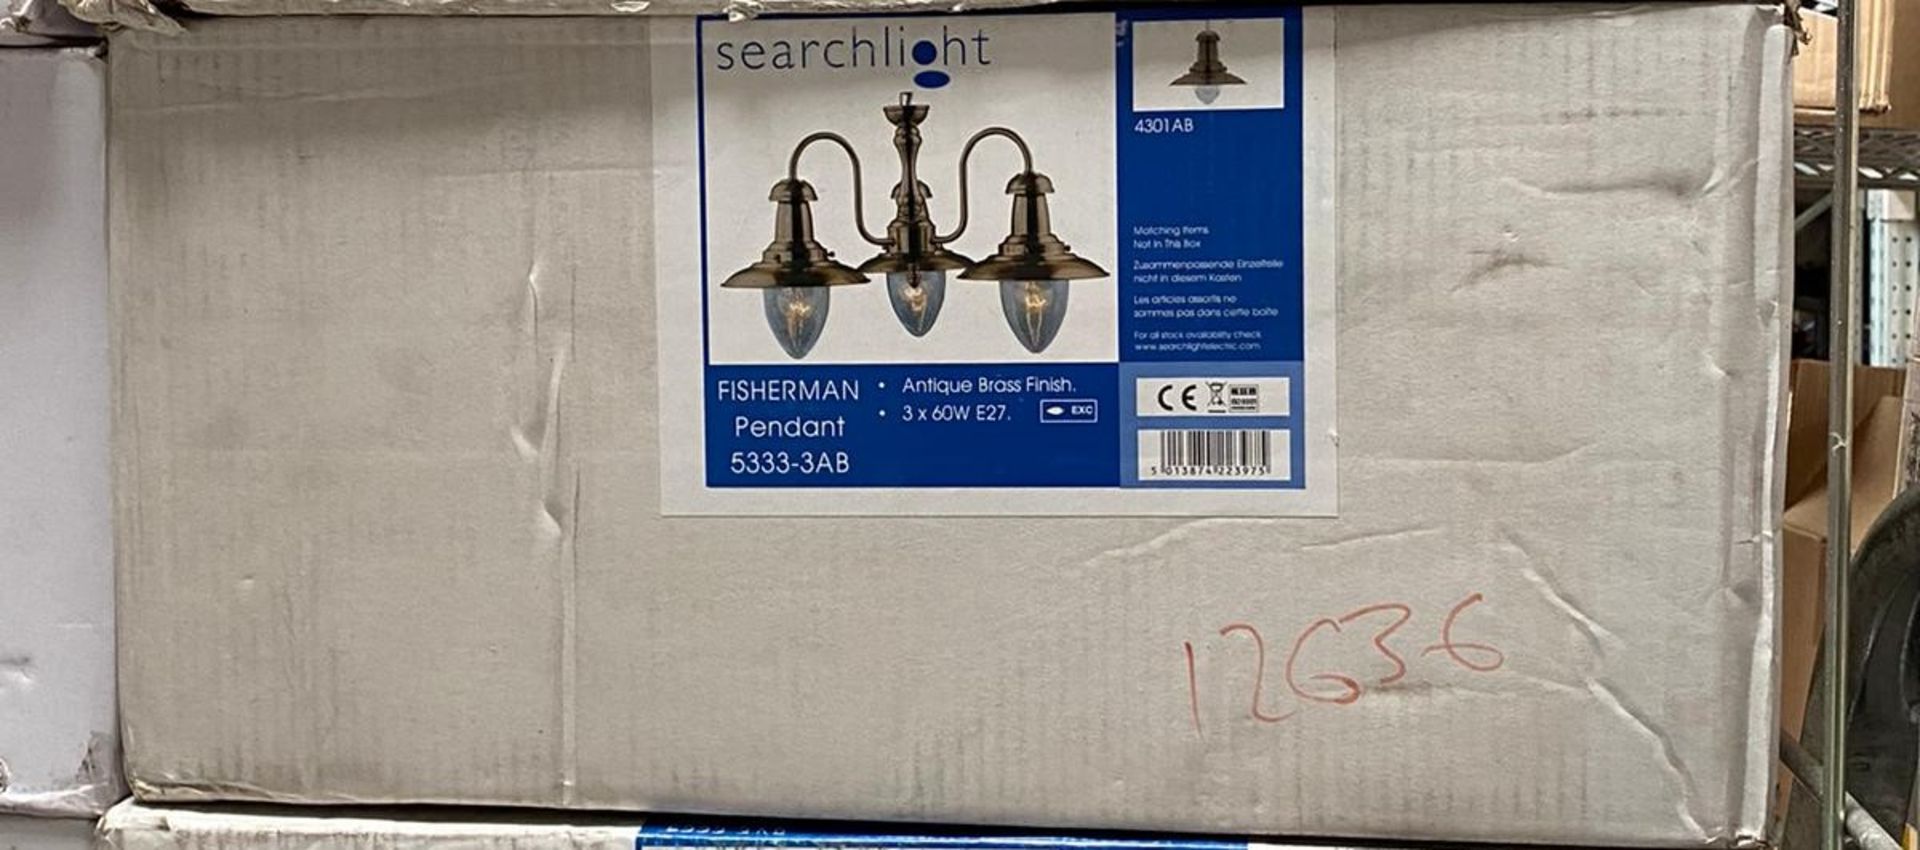 1 x Searchlight Fisherman Antique Brass 3 light Fitting - Ref: 5333-3AB - New and Boxed - RRP: £144 - Image 2 of 4